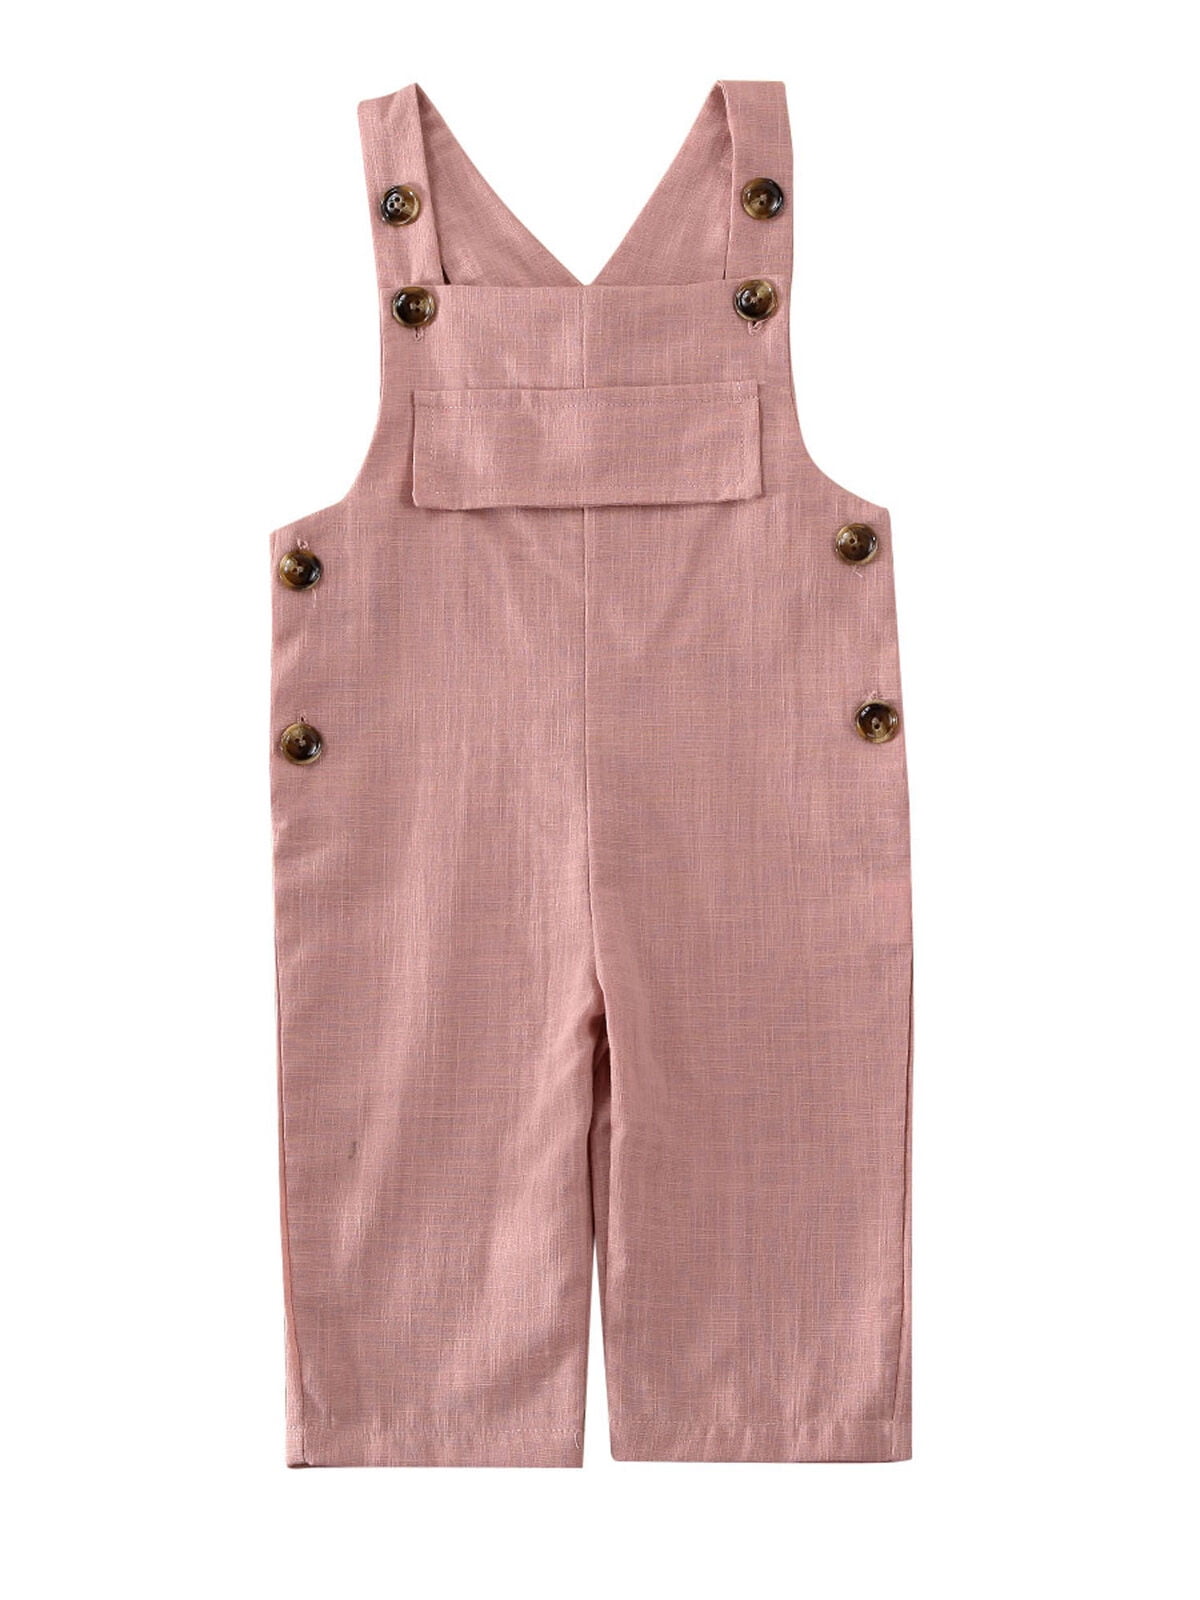 Baby Boys Girls Bib Pants Ovralls with Knot Infant Toddler Suspenders Trousers Dungarees Onesies Jumpsuit